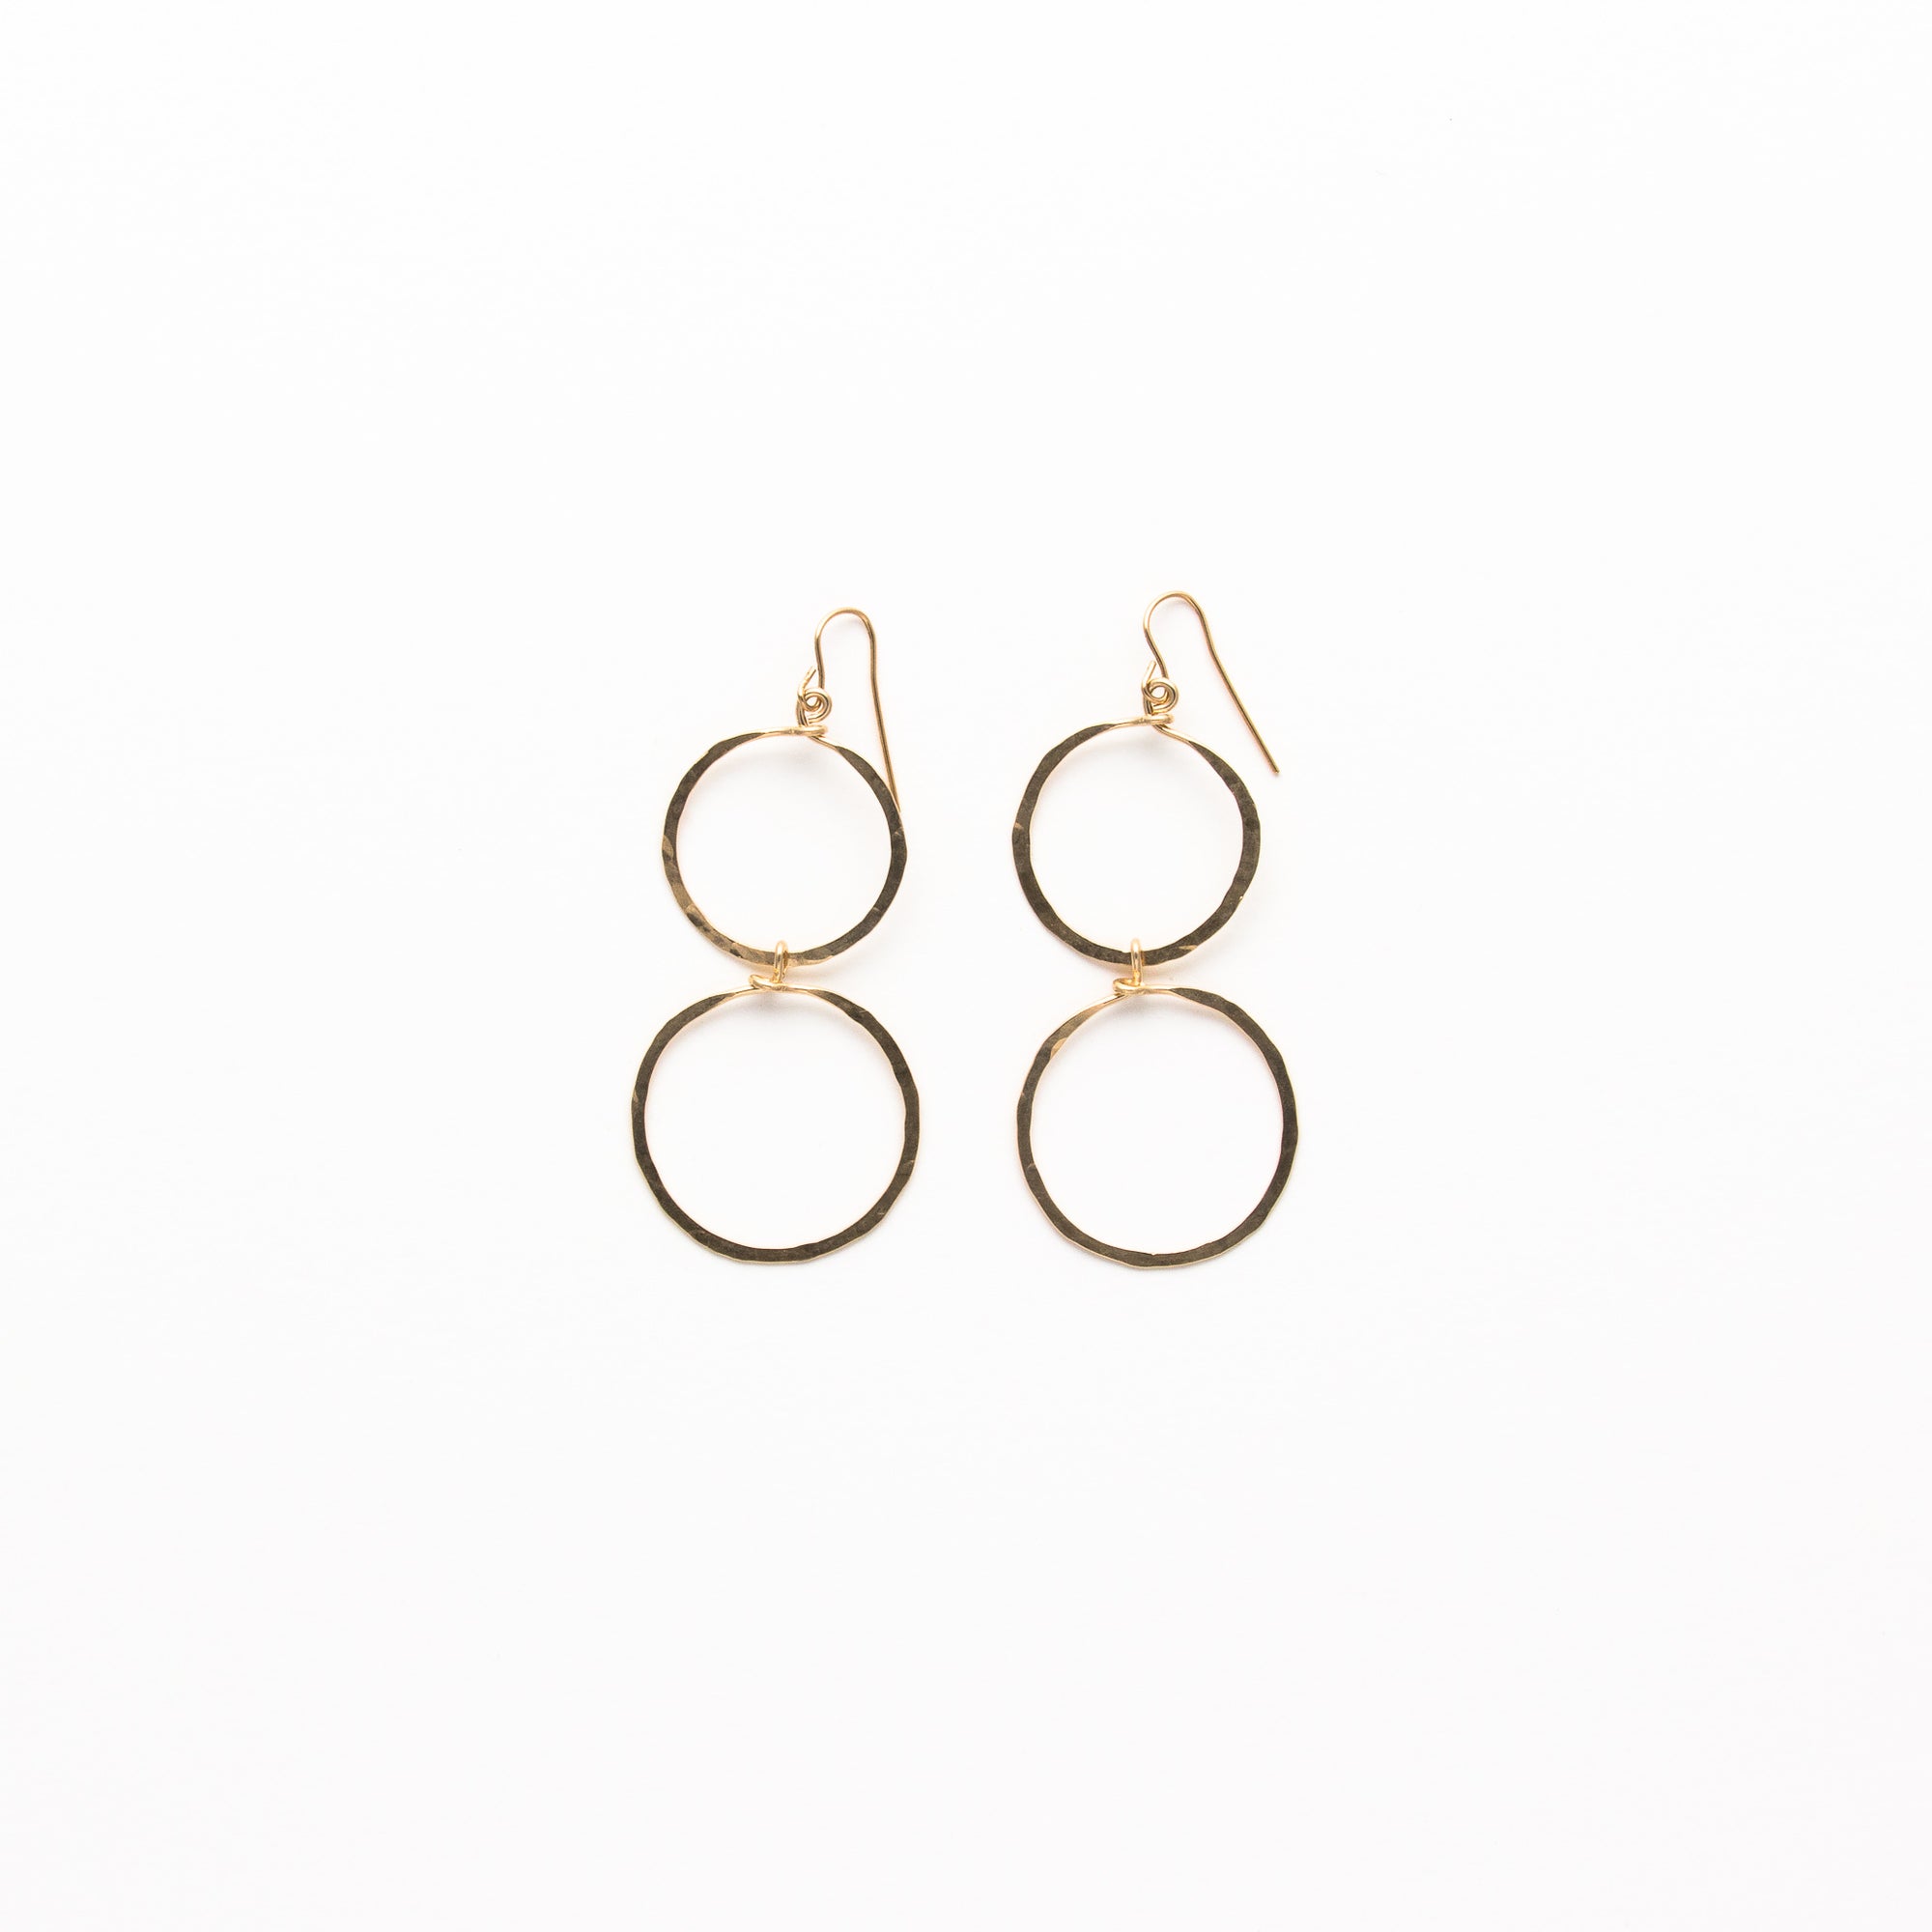 NSC - Hammered Large Double Circle Earrings